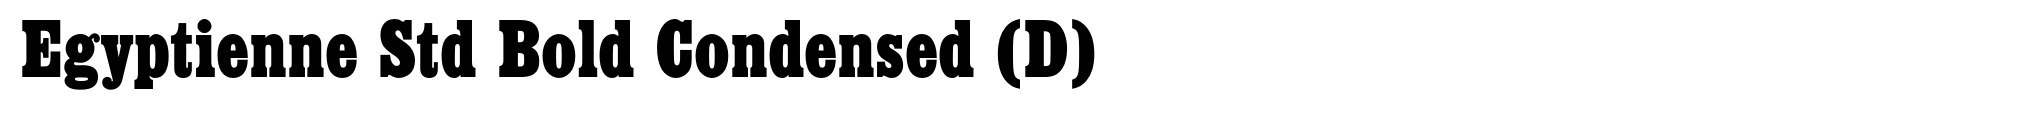 Egyptienne Std Bold Condensed (D) image